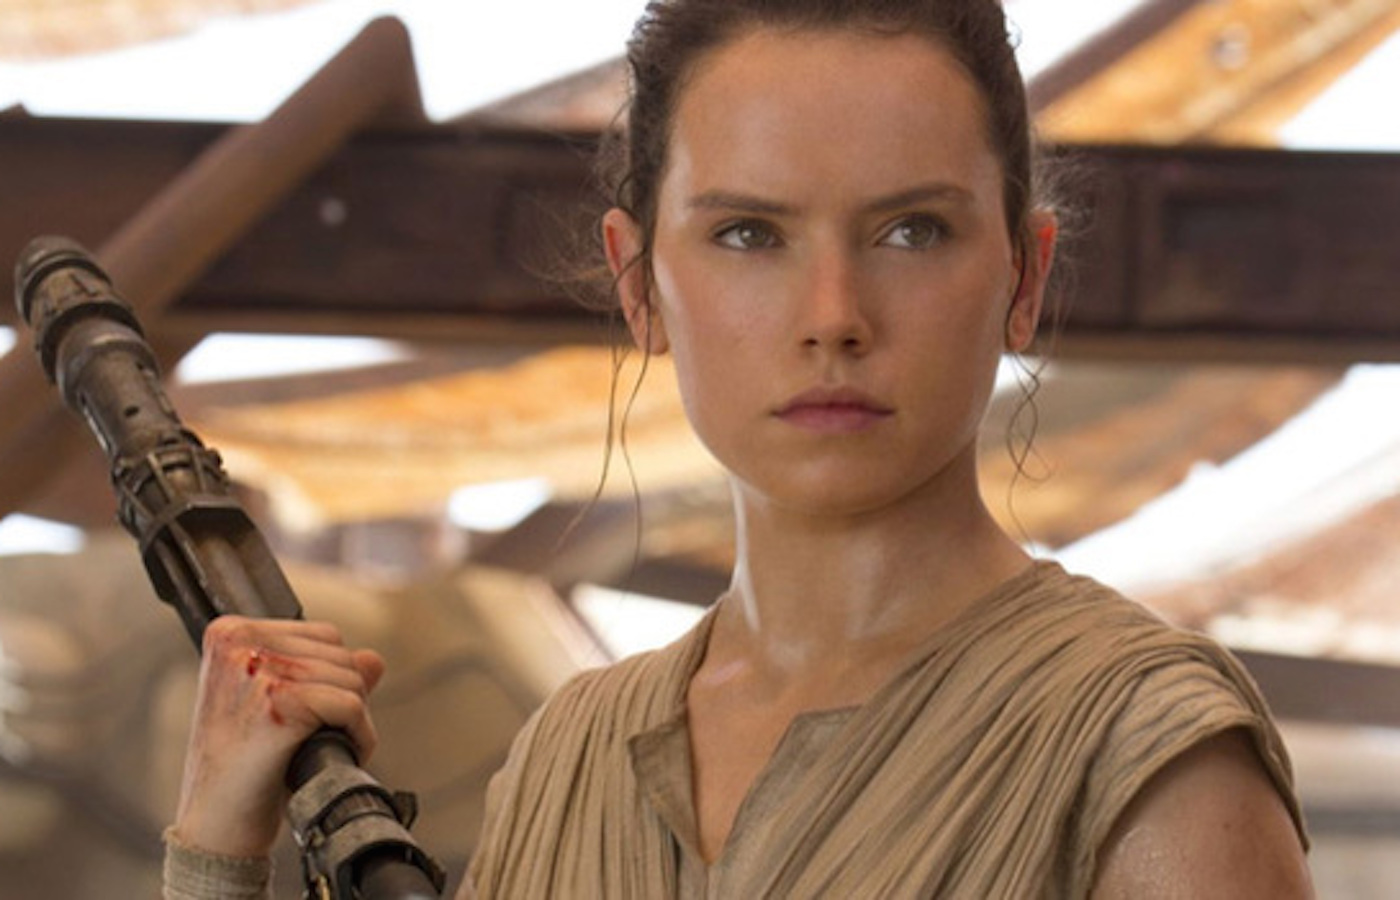 Article post width Daisy Ridley Star Wars The Force Awakens